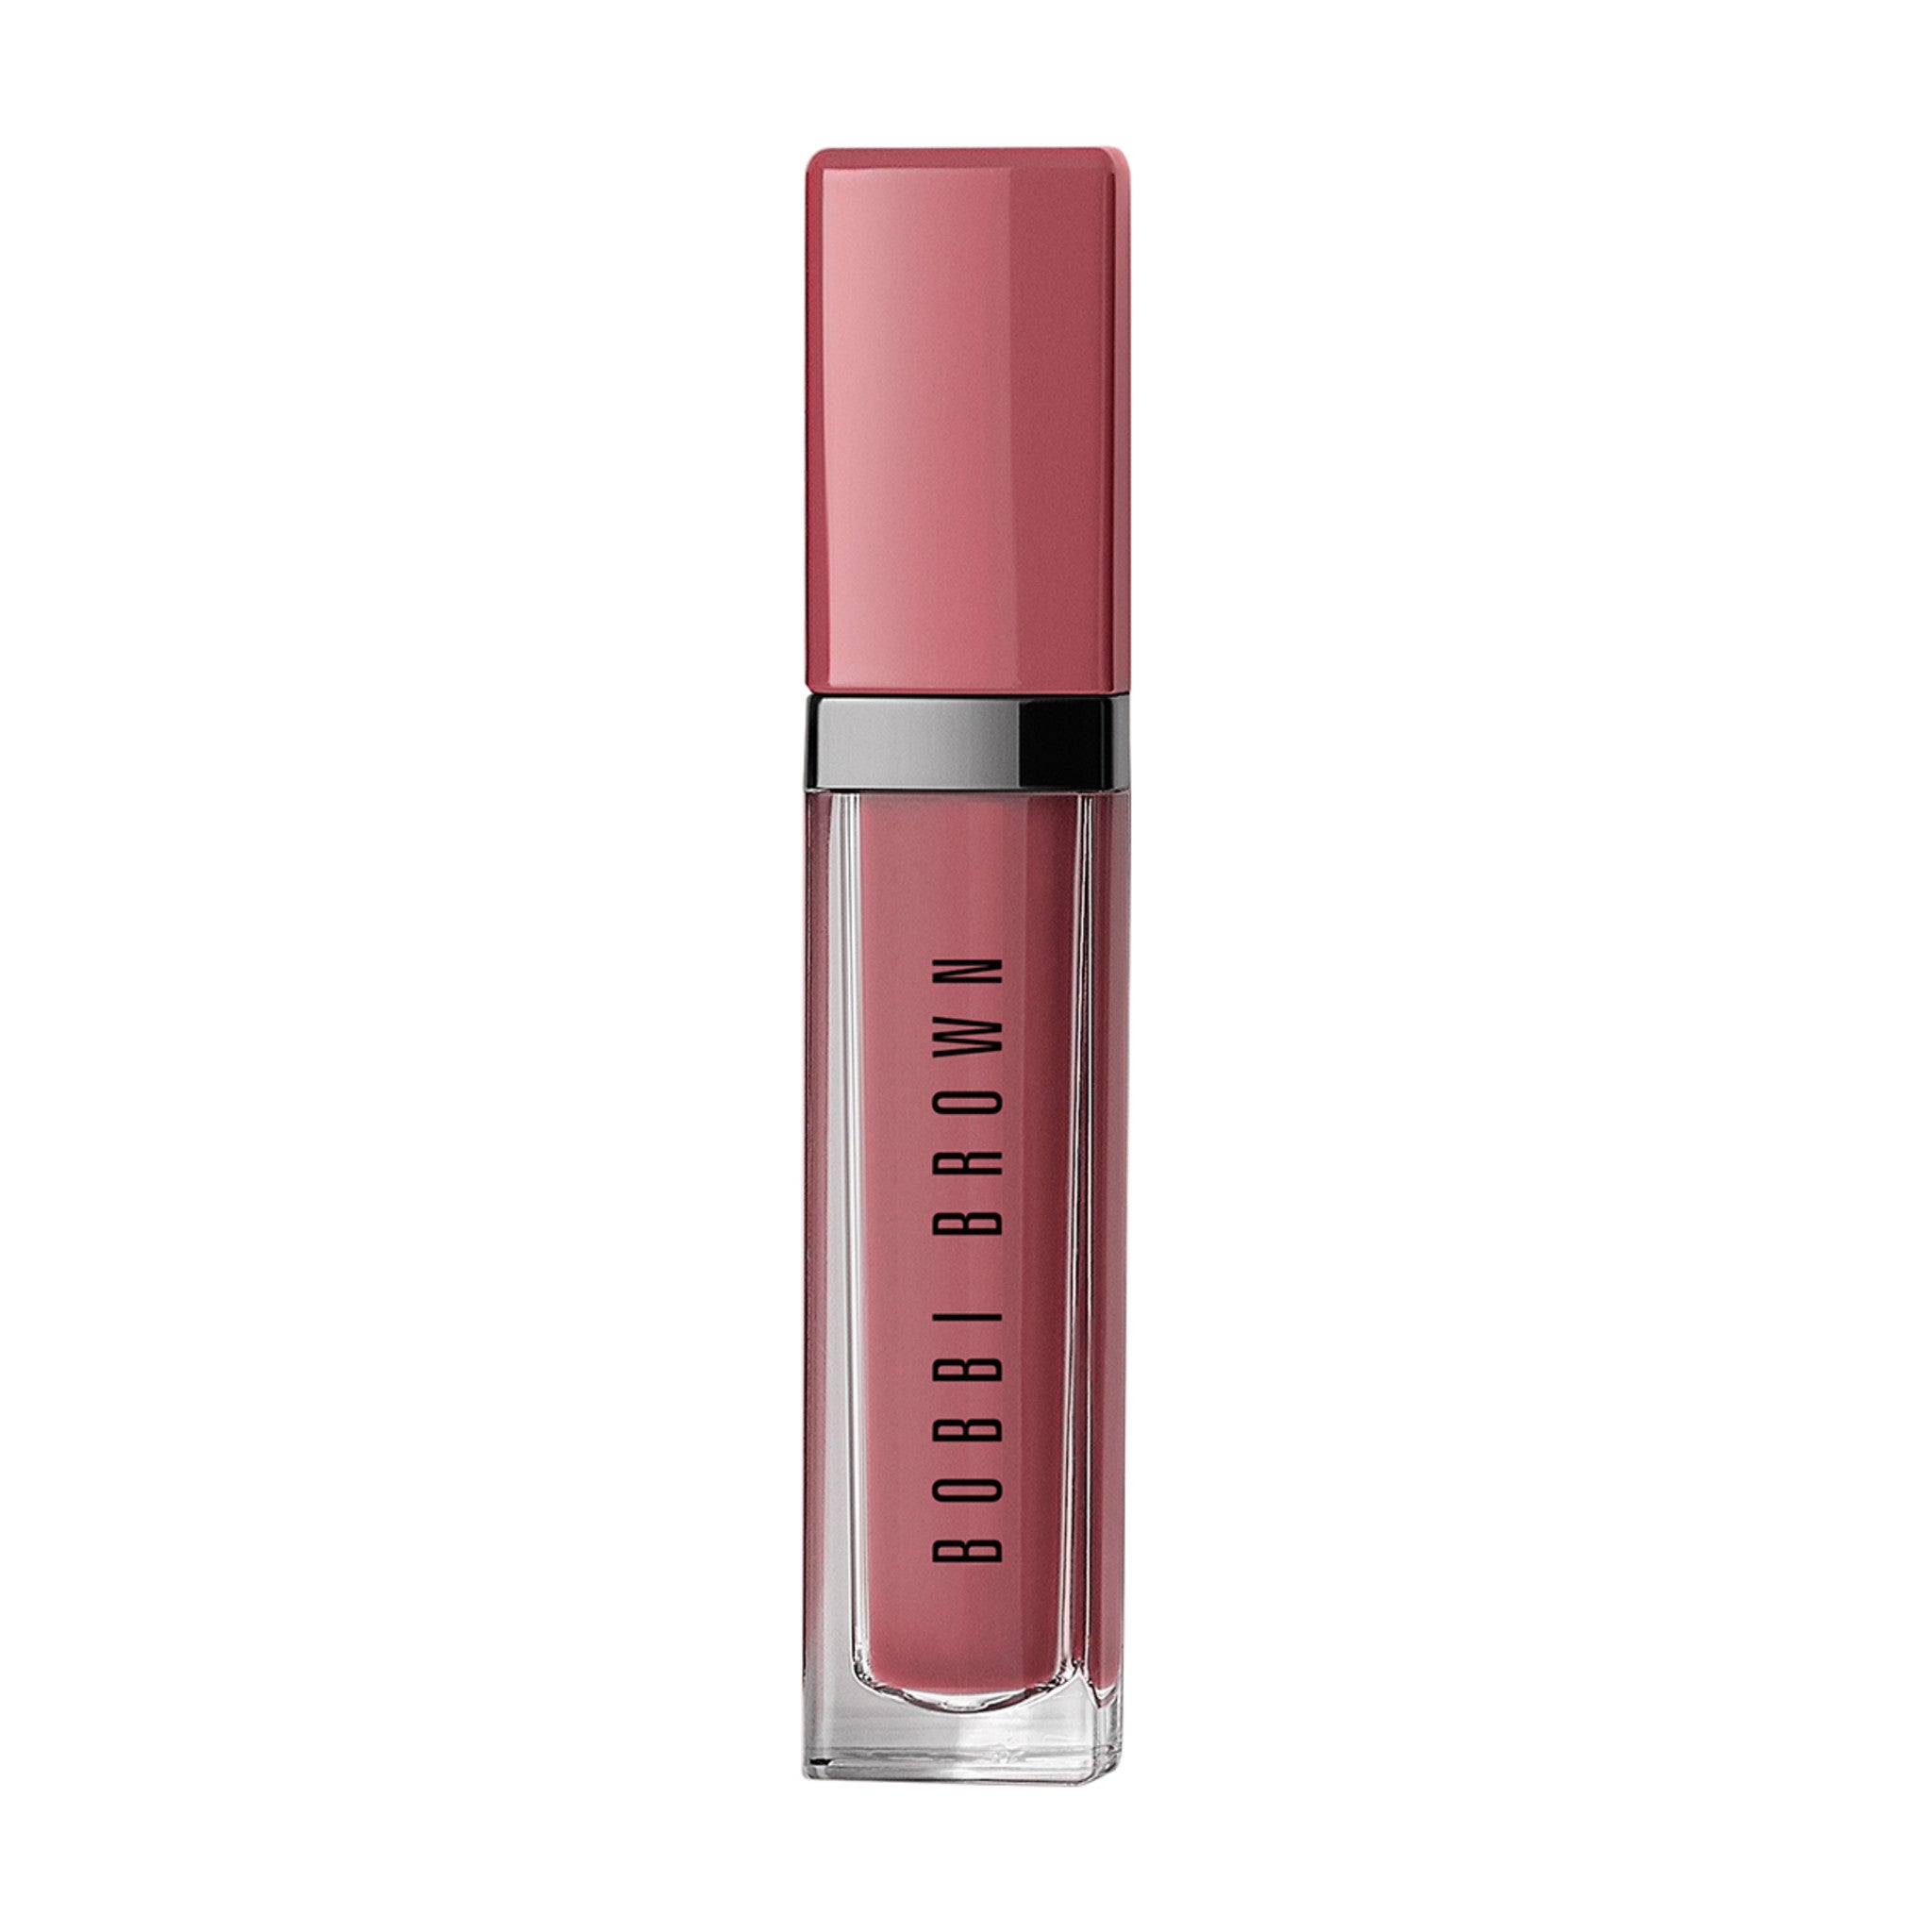 Bobbi Brown Crushed Liquid Lip Color/Shade variant: Give A Fig (A dusty red rose) main image. This product is in the color nude